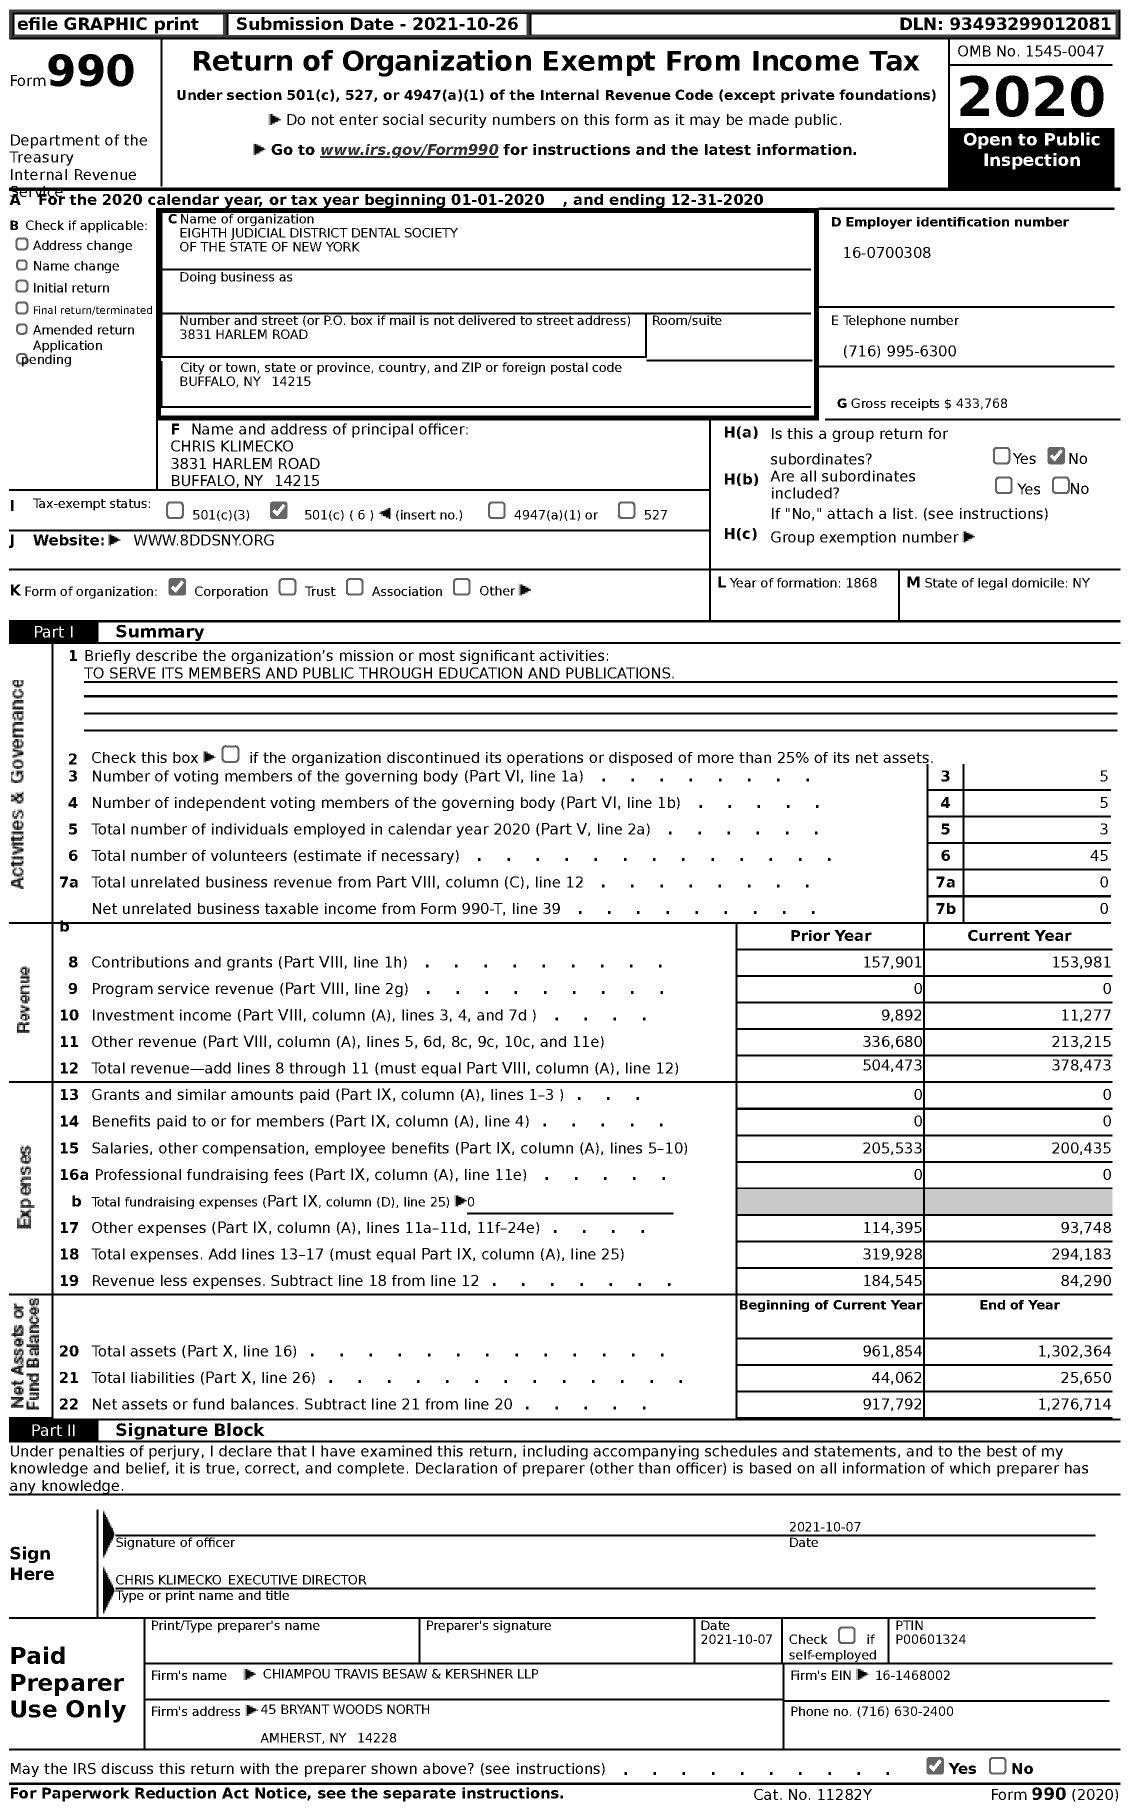 Image of first page of 2020 Form 990 for Eighth Judicial District Dental Society of the State of New York